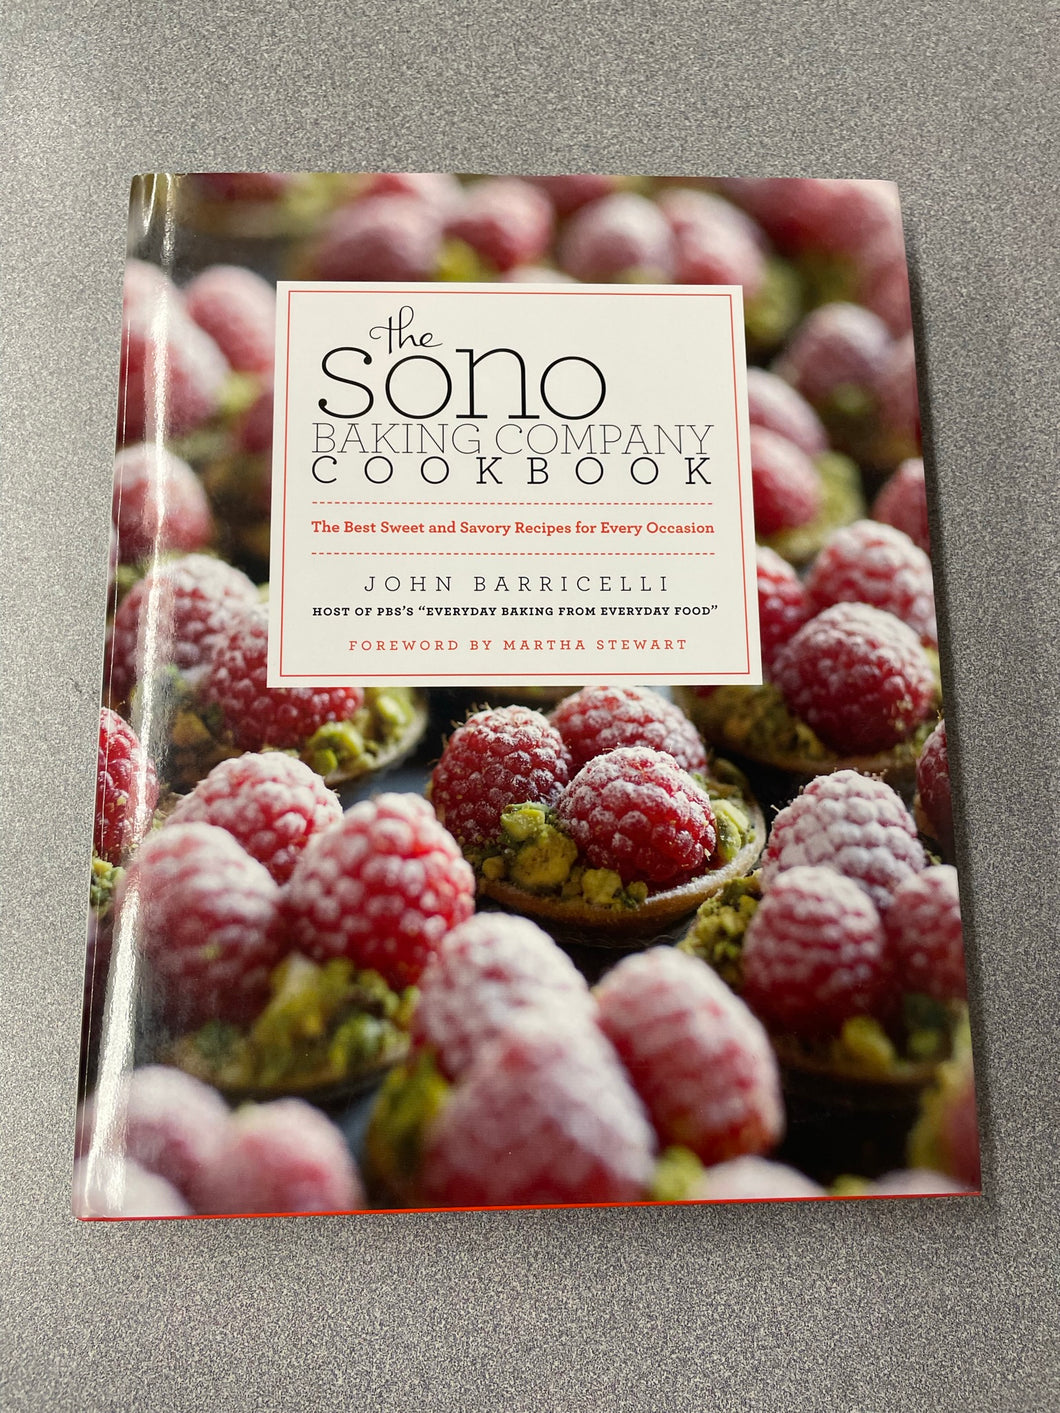 The Sono Baking Company Cookbook: the Best Sweet and Savory Recipes for Every Occasion, Barricelli, John [2010] CO 11/22